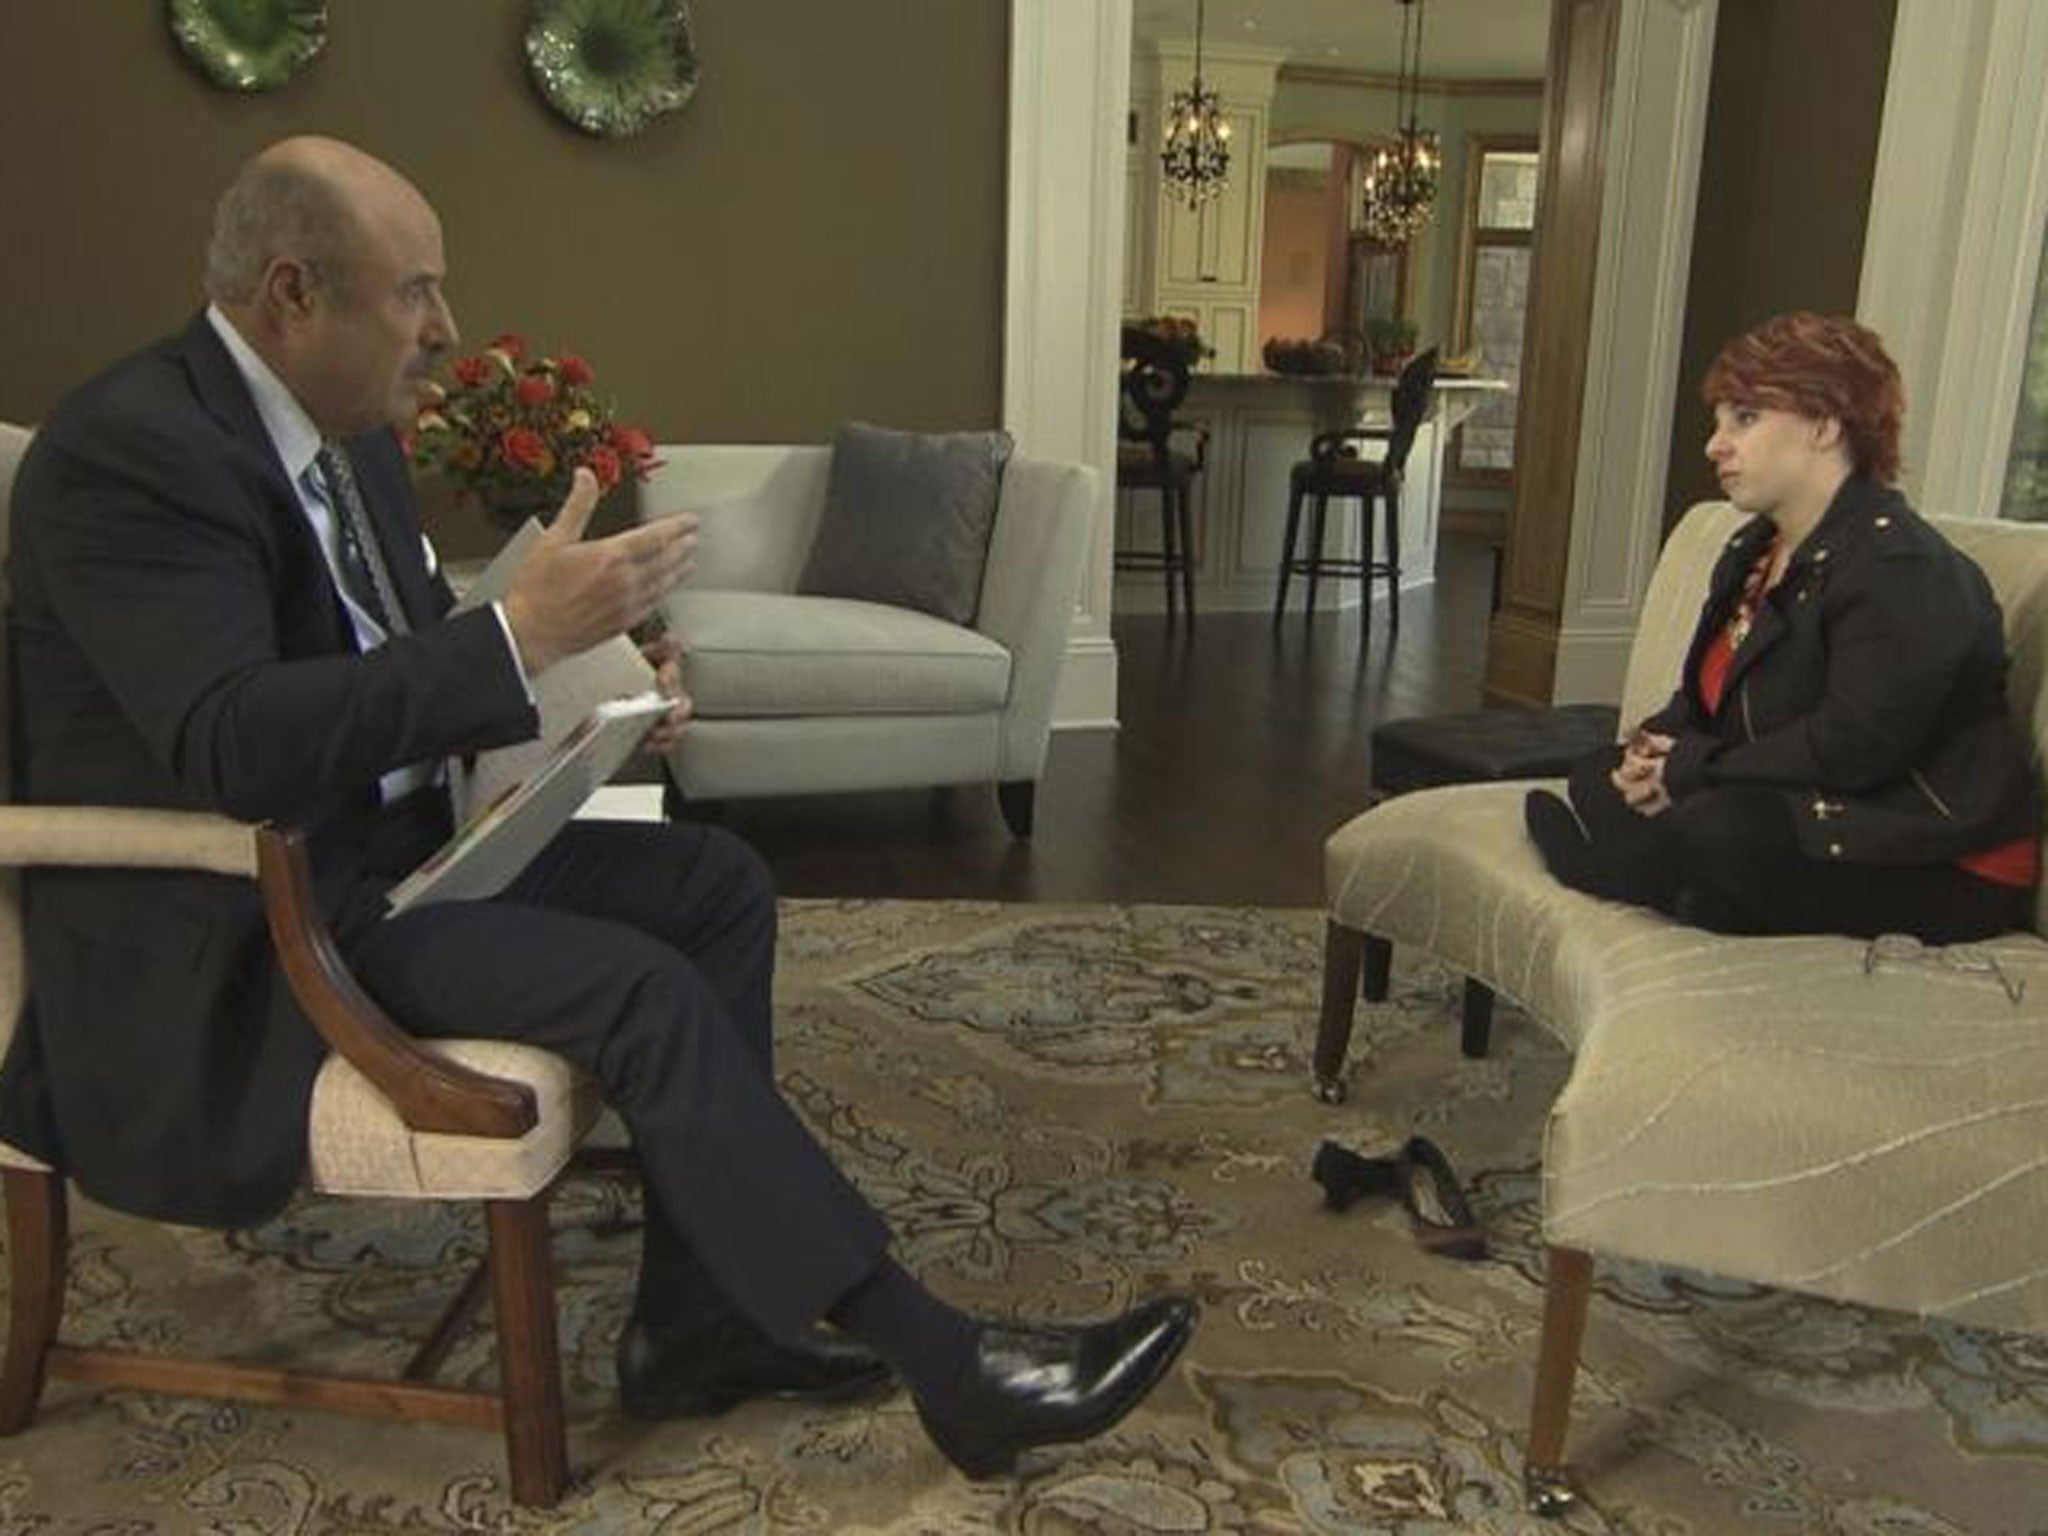 Michelle Knight, the first of Ariel Castro's Cleveland kidnapping victims, is interviewed by Dr Phil McGraw